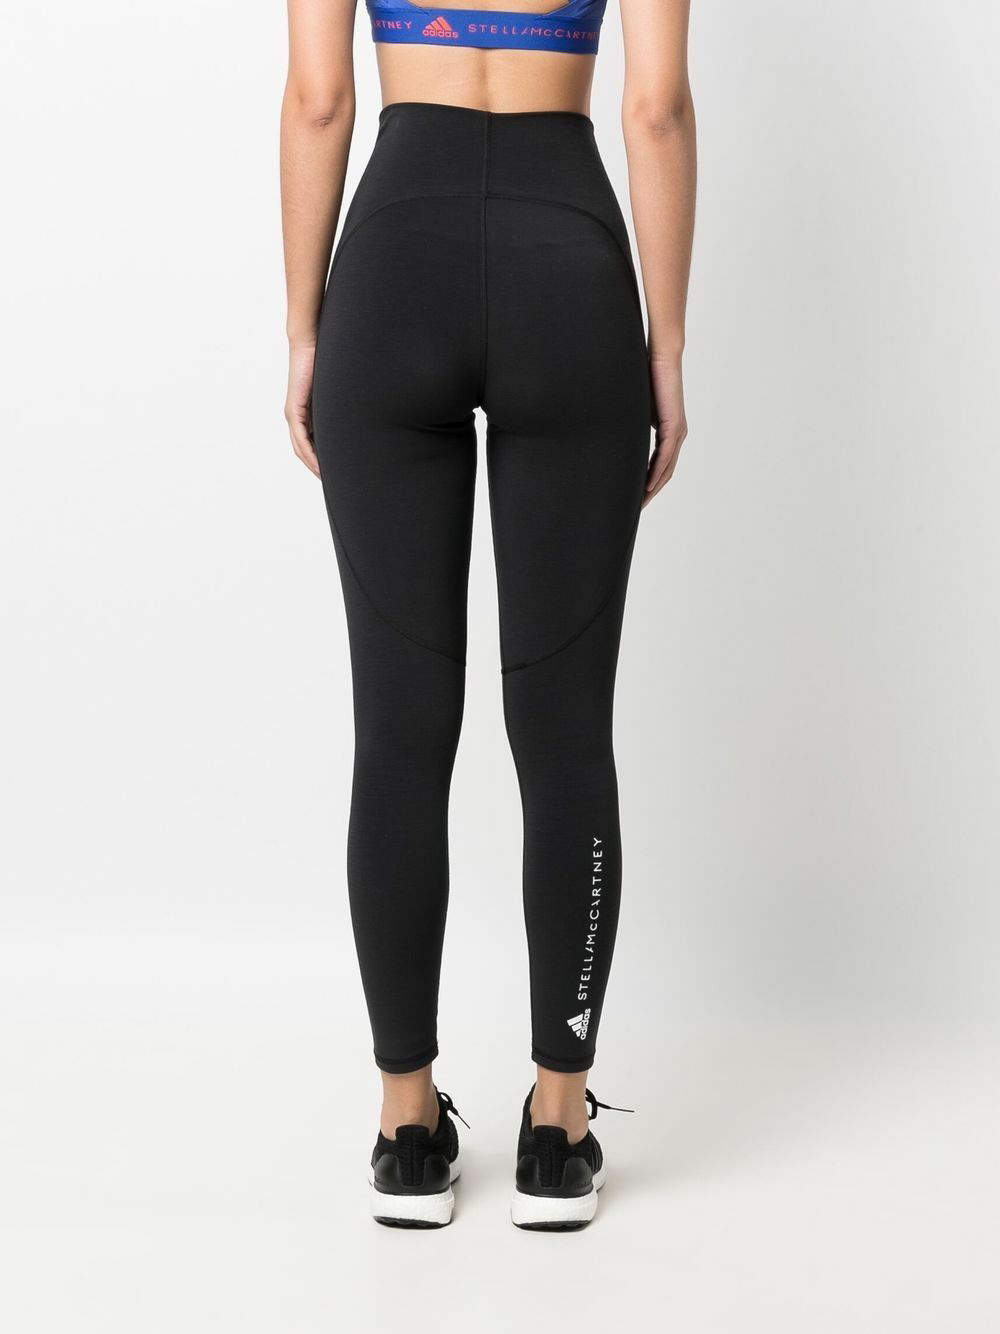 ADIDAS BY STELLA MCCARTNEY - Recycled Polyester Stretch Leggings adidas by Stella  McCartney